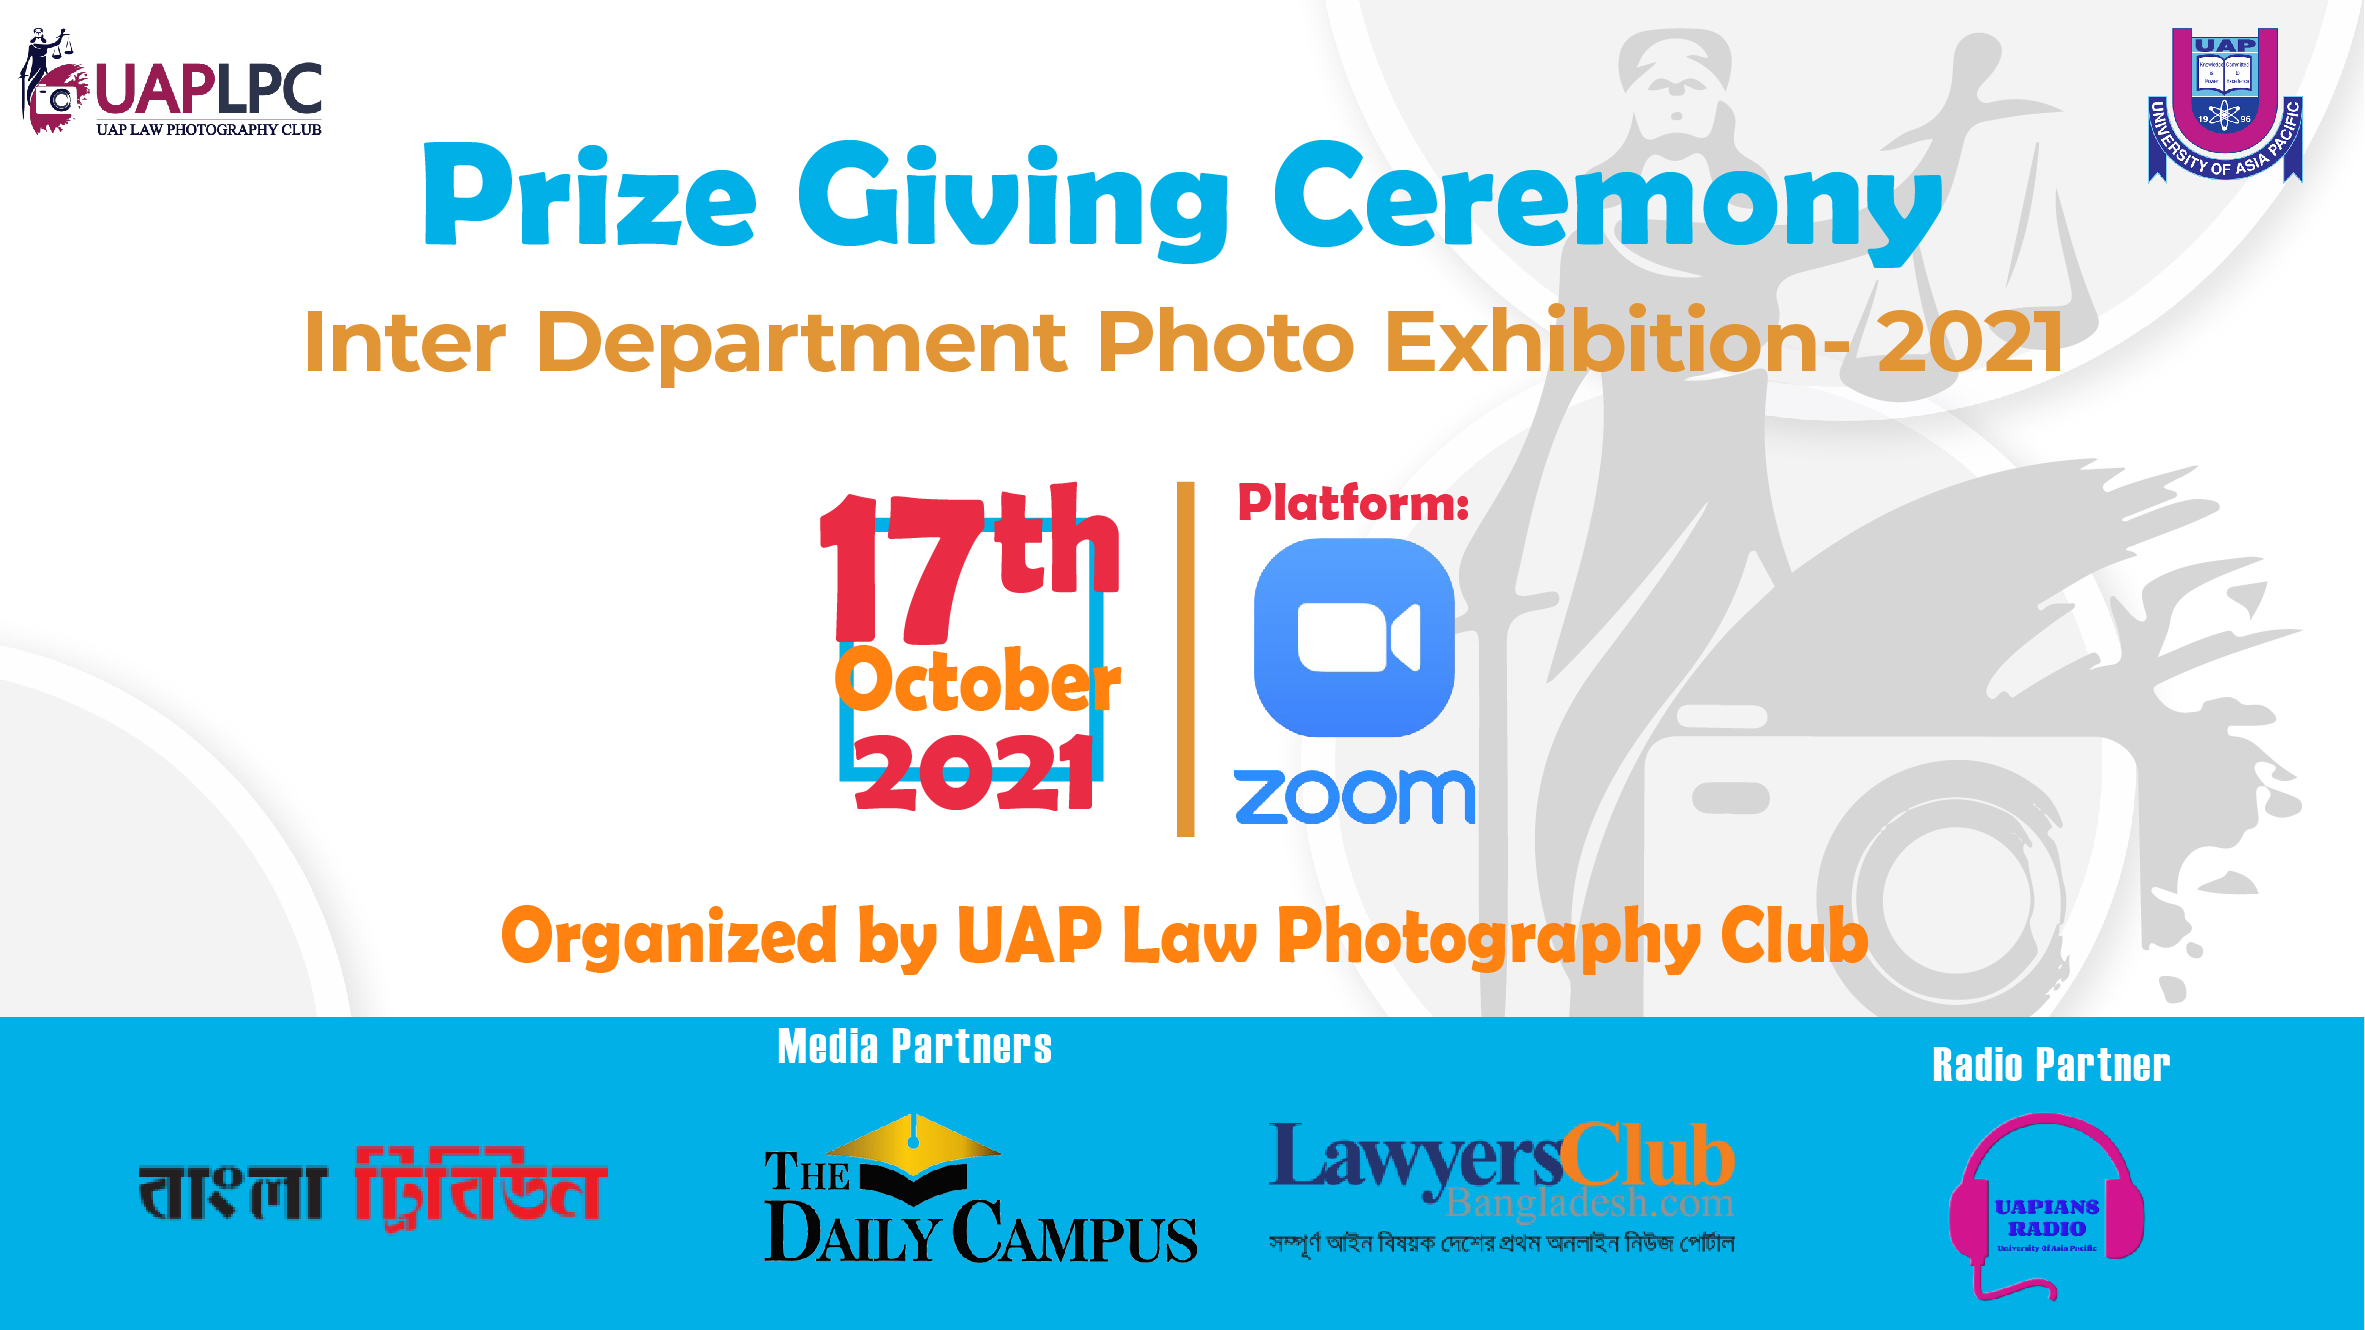 UAP Law Photography Club Holds Prize Giving Ceremony